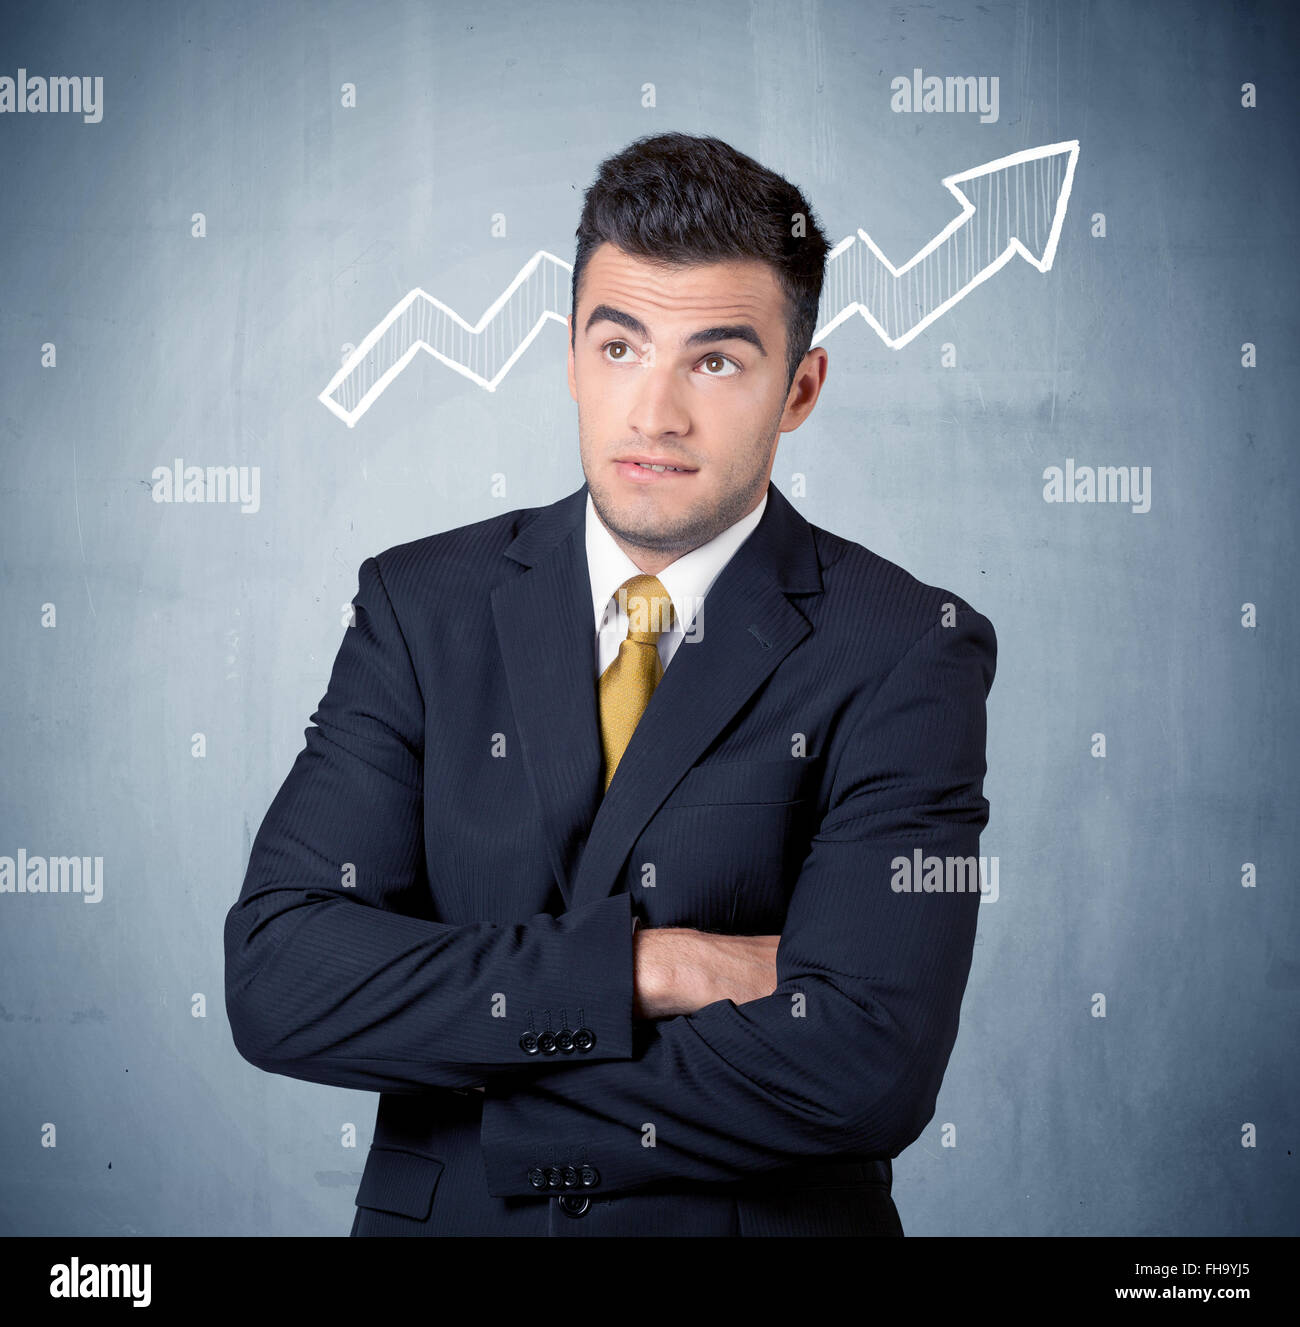 Smiling business guy with graph arrow Stock Photo